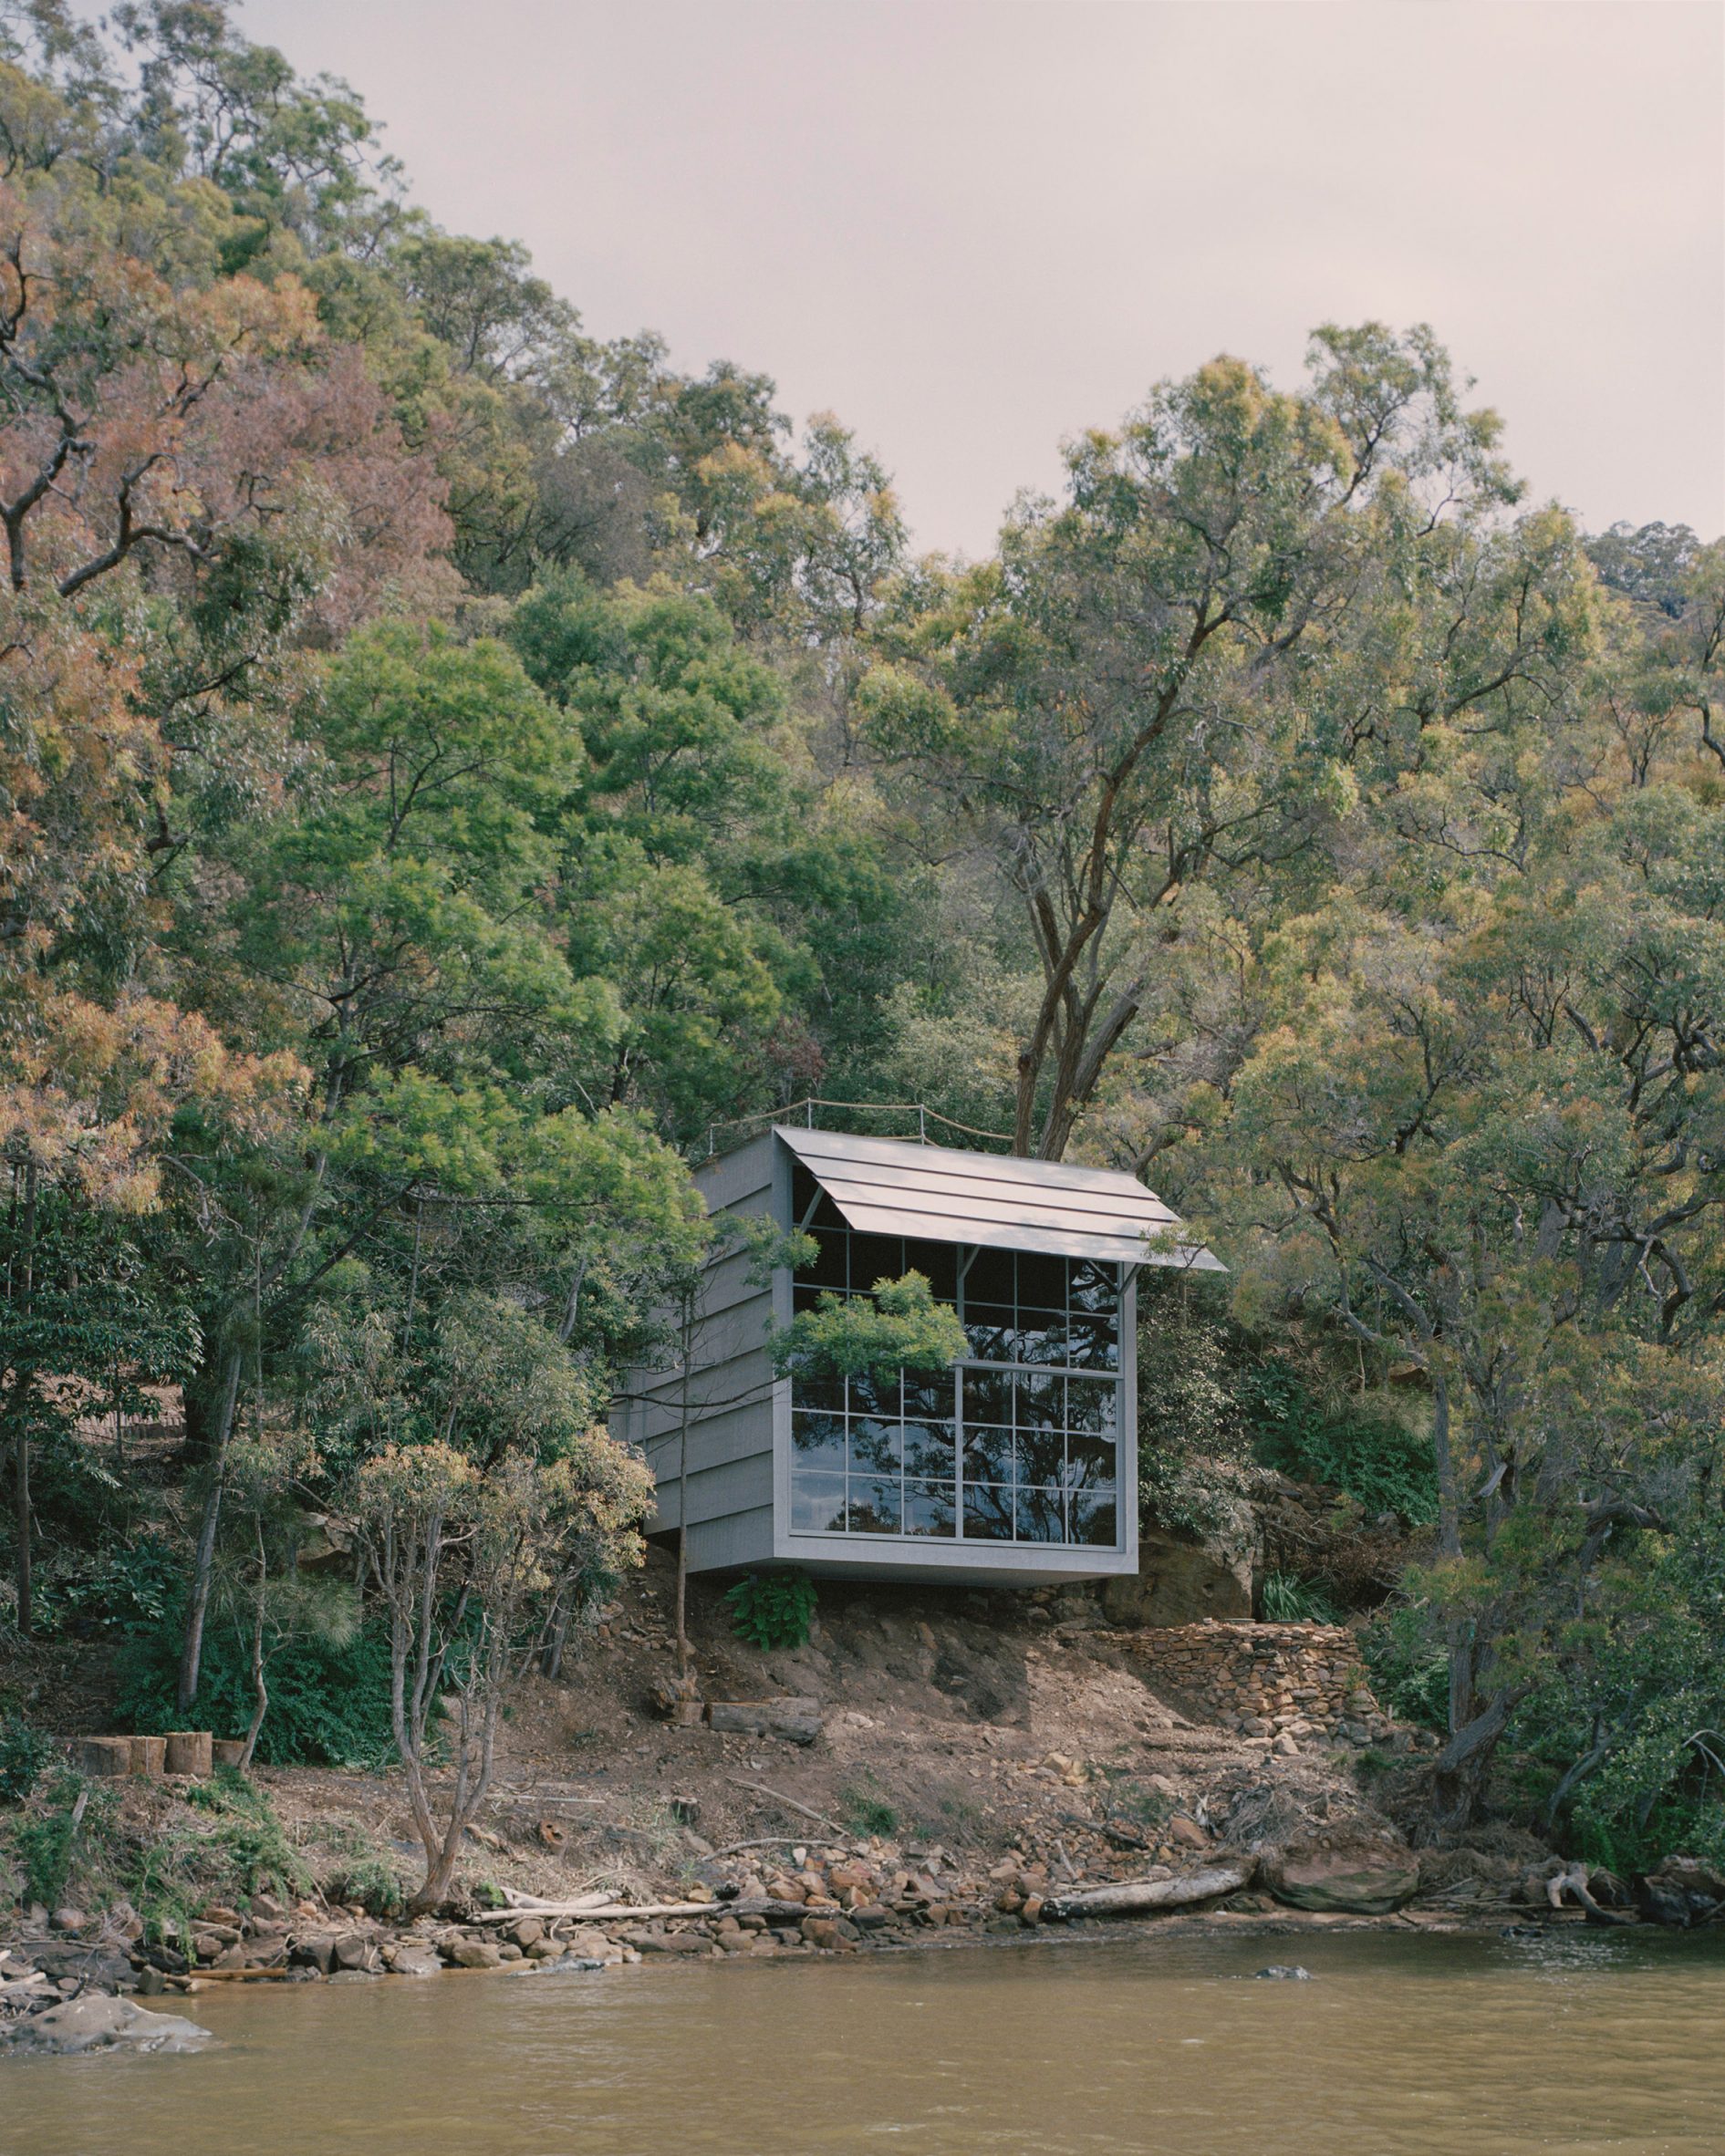 Marramarra Shack is pictured facing a creek